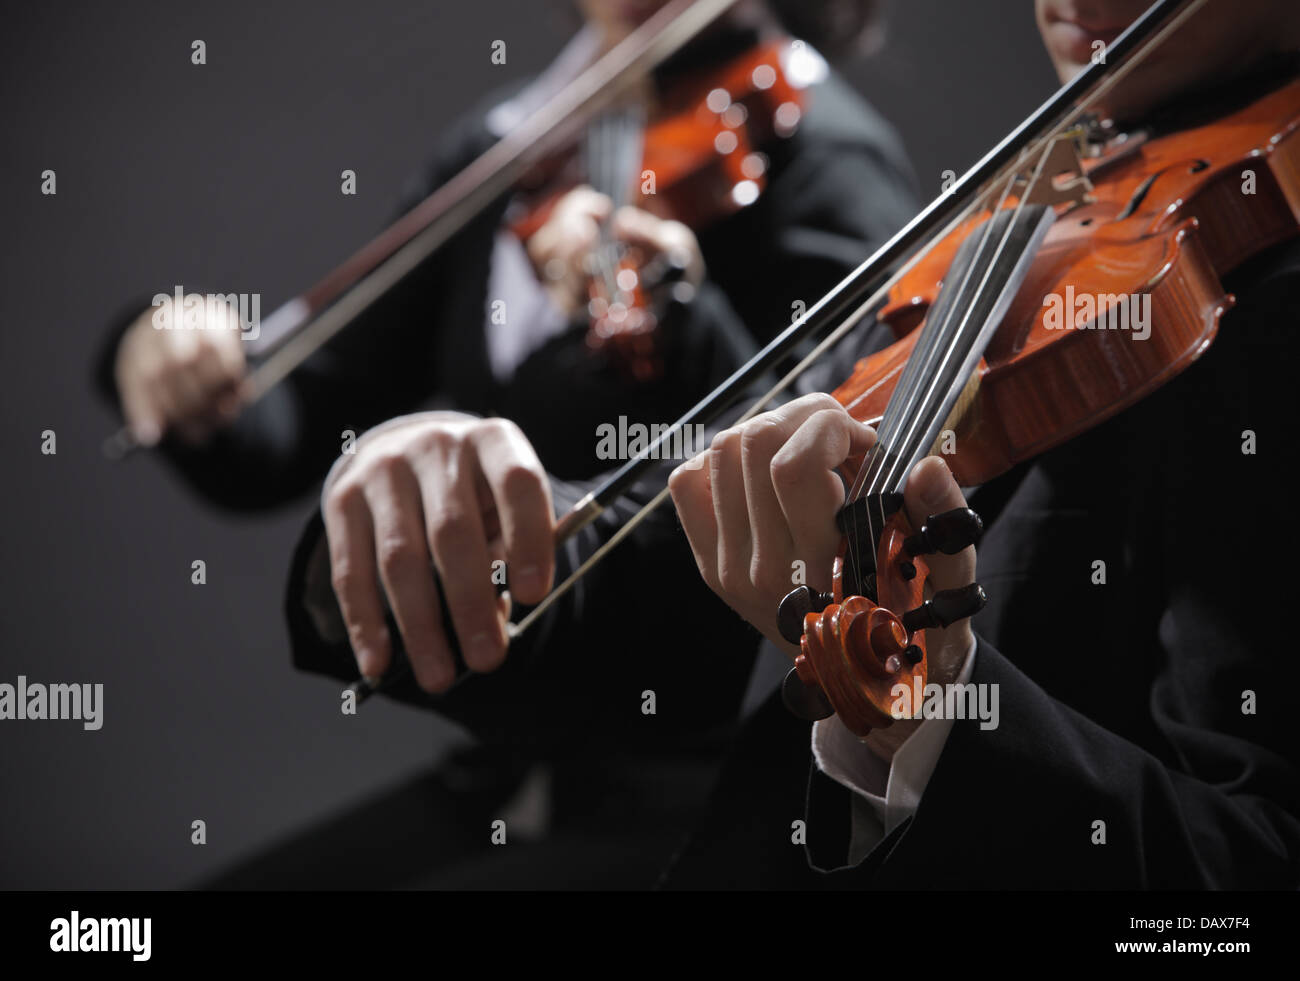 Classical music. Violinists in concert Stock Photo